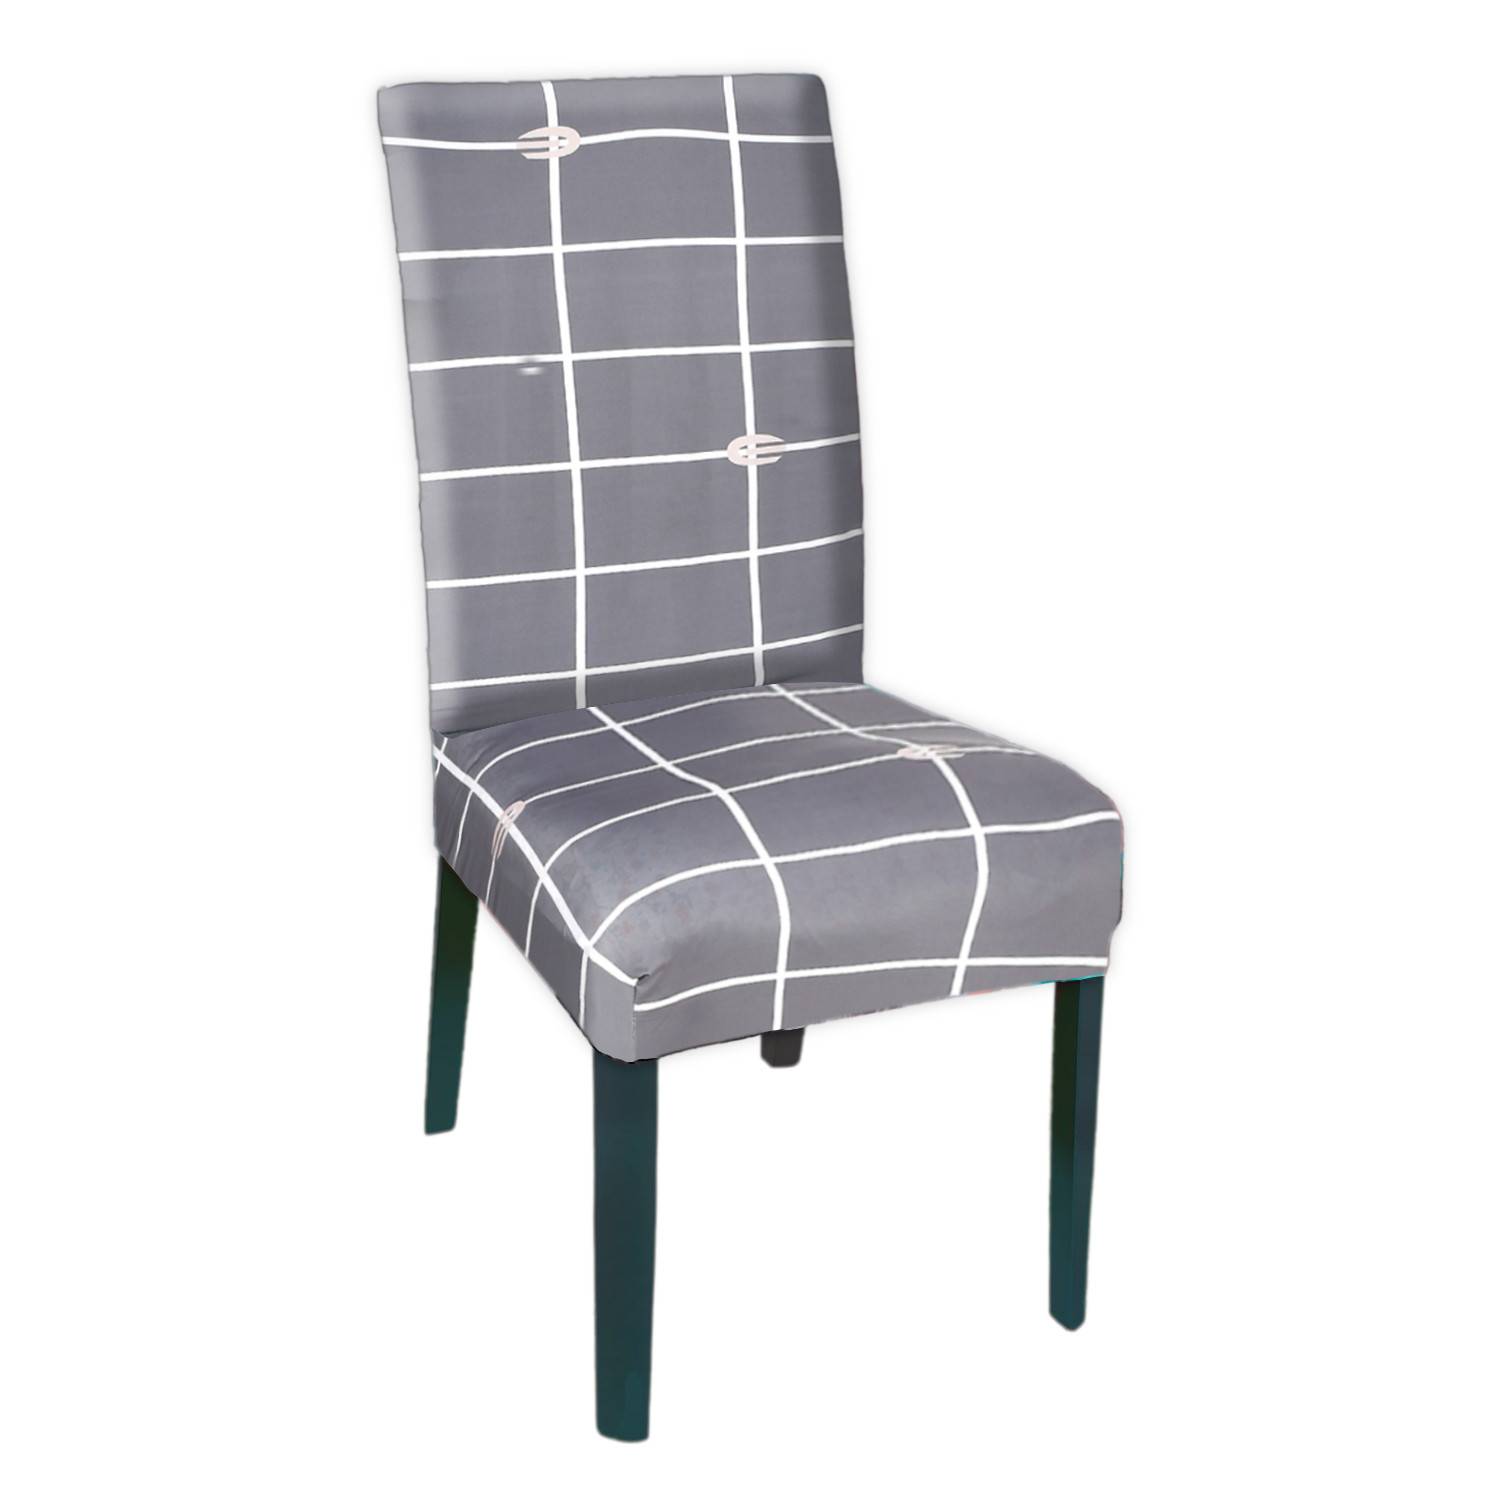 Kuber Industries Check Printed Stretchable, Non-Slip Polyster 1 Seater Sofa & Chair Cover Set, Set of 2 (Grey)